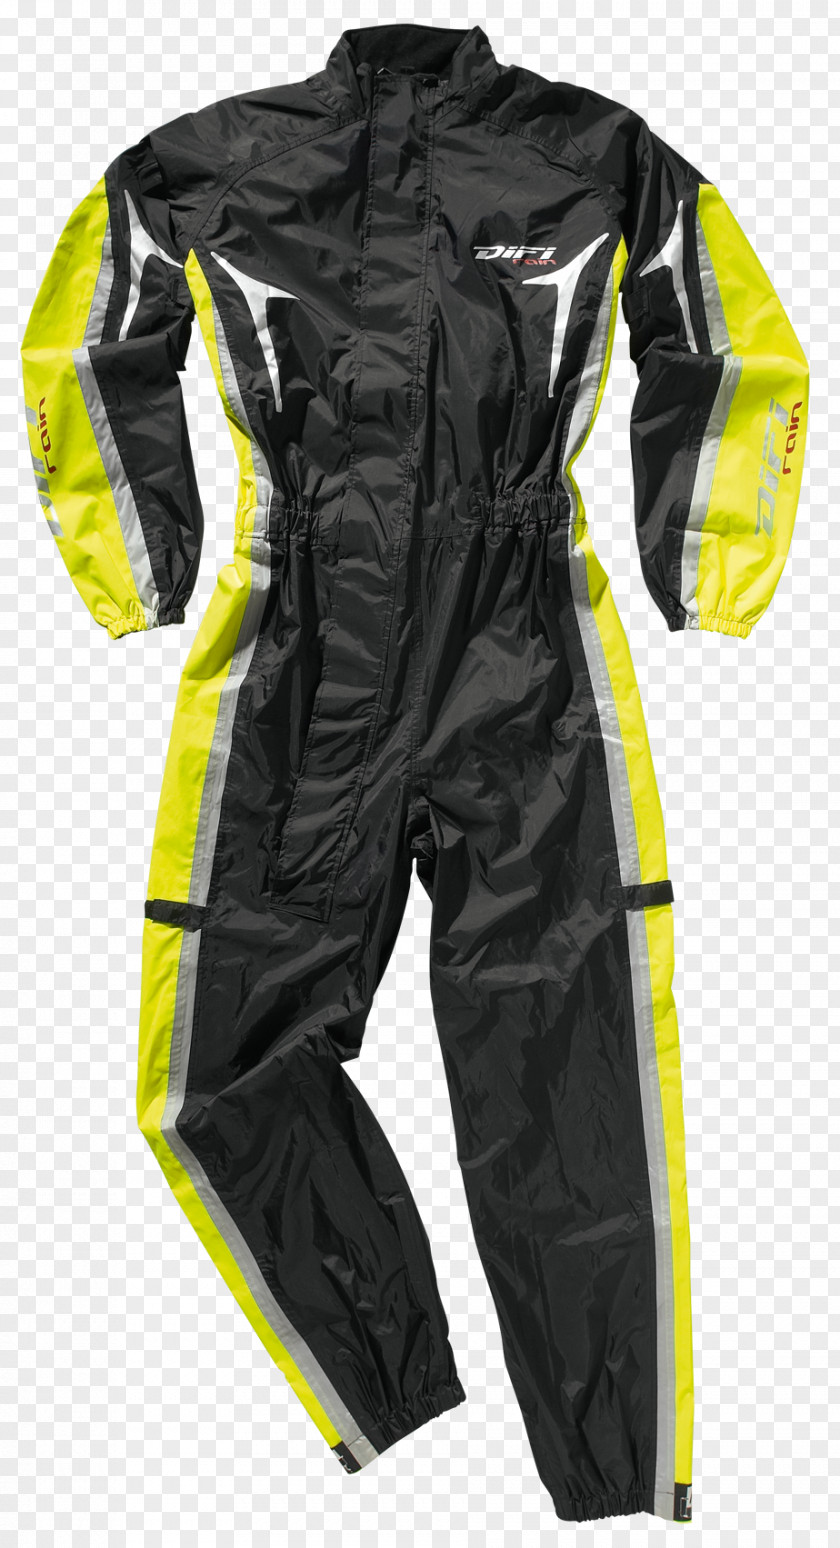 Motorcycle Personal Protective Equipment Jacket Clothing MotoPort Goes PNG